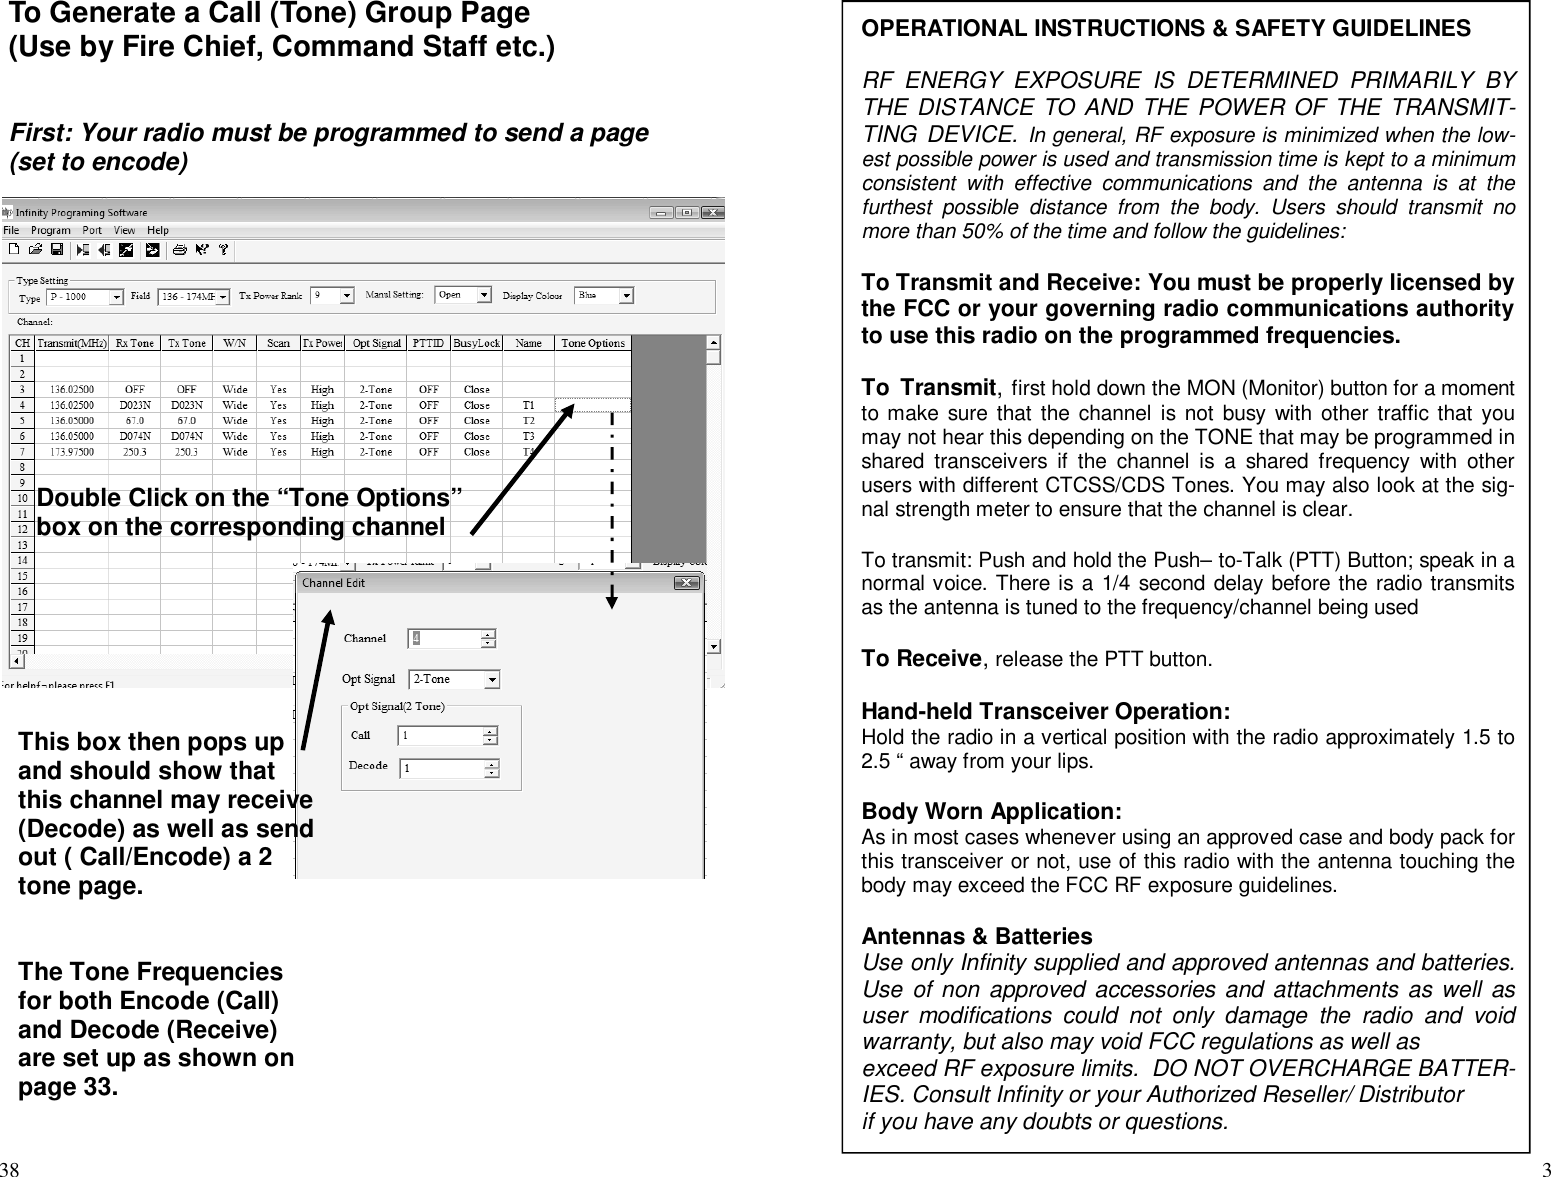 38To Generate a Call (Tone) Group Page(Use by Fire Chief, Command Staff etc.)First: Your radio must be programmed to send a page(set to encode)Double Click on the “Tone Options”box on the corresponding channelThis box then pops upand should show thatthis channel may receive(Decode) as well as sendout ( Call/Encode) a 2tone page.The Tone Frequenciesfor both Encode (Call)and Decode (Receive)are set up as shown onpage 33.3OPERATIONAL INSTRUCTIONS &amp; SAFETY GUIDELINESRF ENERGY EXPOSURE IS DETERMINED PRIMARILY BYTHE DISTANCE TO AND THE POWER OF THE TRANSMIT-TING DEVICE. In general, RF exposure is minimized when the low-est possible power is used and transmission time is kept to a minimumconsistent with effective communications and the antenna is at thefurthest possible distance from the body. Users should transmit nomore than 50% of the time and follow the guidelines:To Transmit and Receive: You must be properly licensed bythe FCC or your governing radio communications authorityto use this radio on the programmed frequencies.To Transmit,first hold down the MON (Monitor) button for a momentto make sure that the channel is not busy with other traffic that youmay not hear this depending on the TONE that may be programmed inshared transceivers if the channel is a shared frequency with otherusers with different CTCSS/CDS Tones. You may also look at the sig-nal strength meter to ensure that the channel is clear.To transmit: Push and hold the Push– to-Talk (PTT) Button; speak in anormal voice. There is a 1/4 second delay before the radio transmitsas the antenna is tuned to the frequency/channel being usedTo Receive,release the PTT button.Hand-held Transceiver Operation:Hold the radio in a vertical position with the radio approximately 1.5 to2.5 “ away from your lips.Body Worn Application:As in most cases whenever using an approved case and body pack forthis transceiver or not, use of this radio with the antenna touching thebody may exceed the FCC RF exposure guidelines.Antennas &amp; BatteriesUse only Infinity supplied and approved antennas and batteries.Use of non approved accessories and attachments as well asuser modifications could not only damage the radio and voidwarranty, but also may void FCC regulations as well asexceed RF exposure limits. DO NOT OVERCHARGE BATTER-IES. Consult Infinity or your Authorized Reseller/ Distributorif you have any doubts or questions.